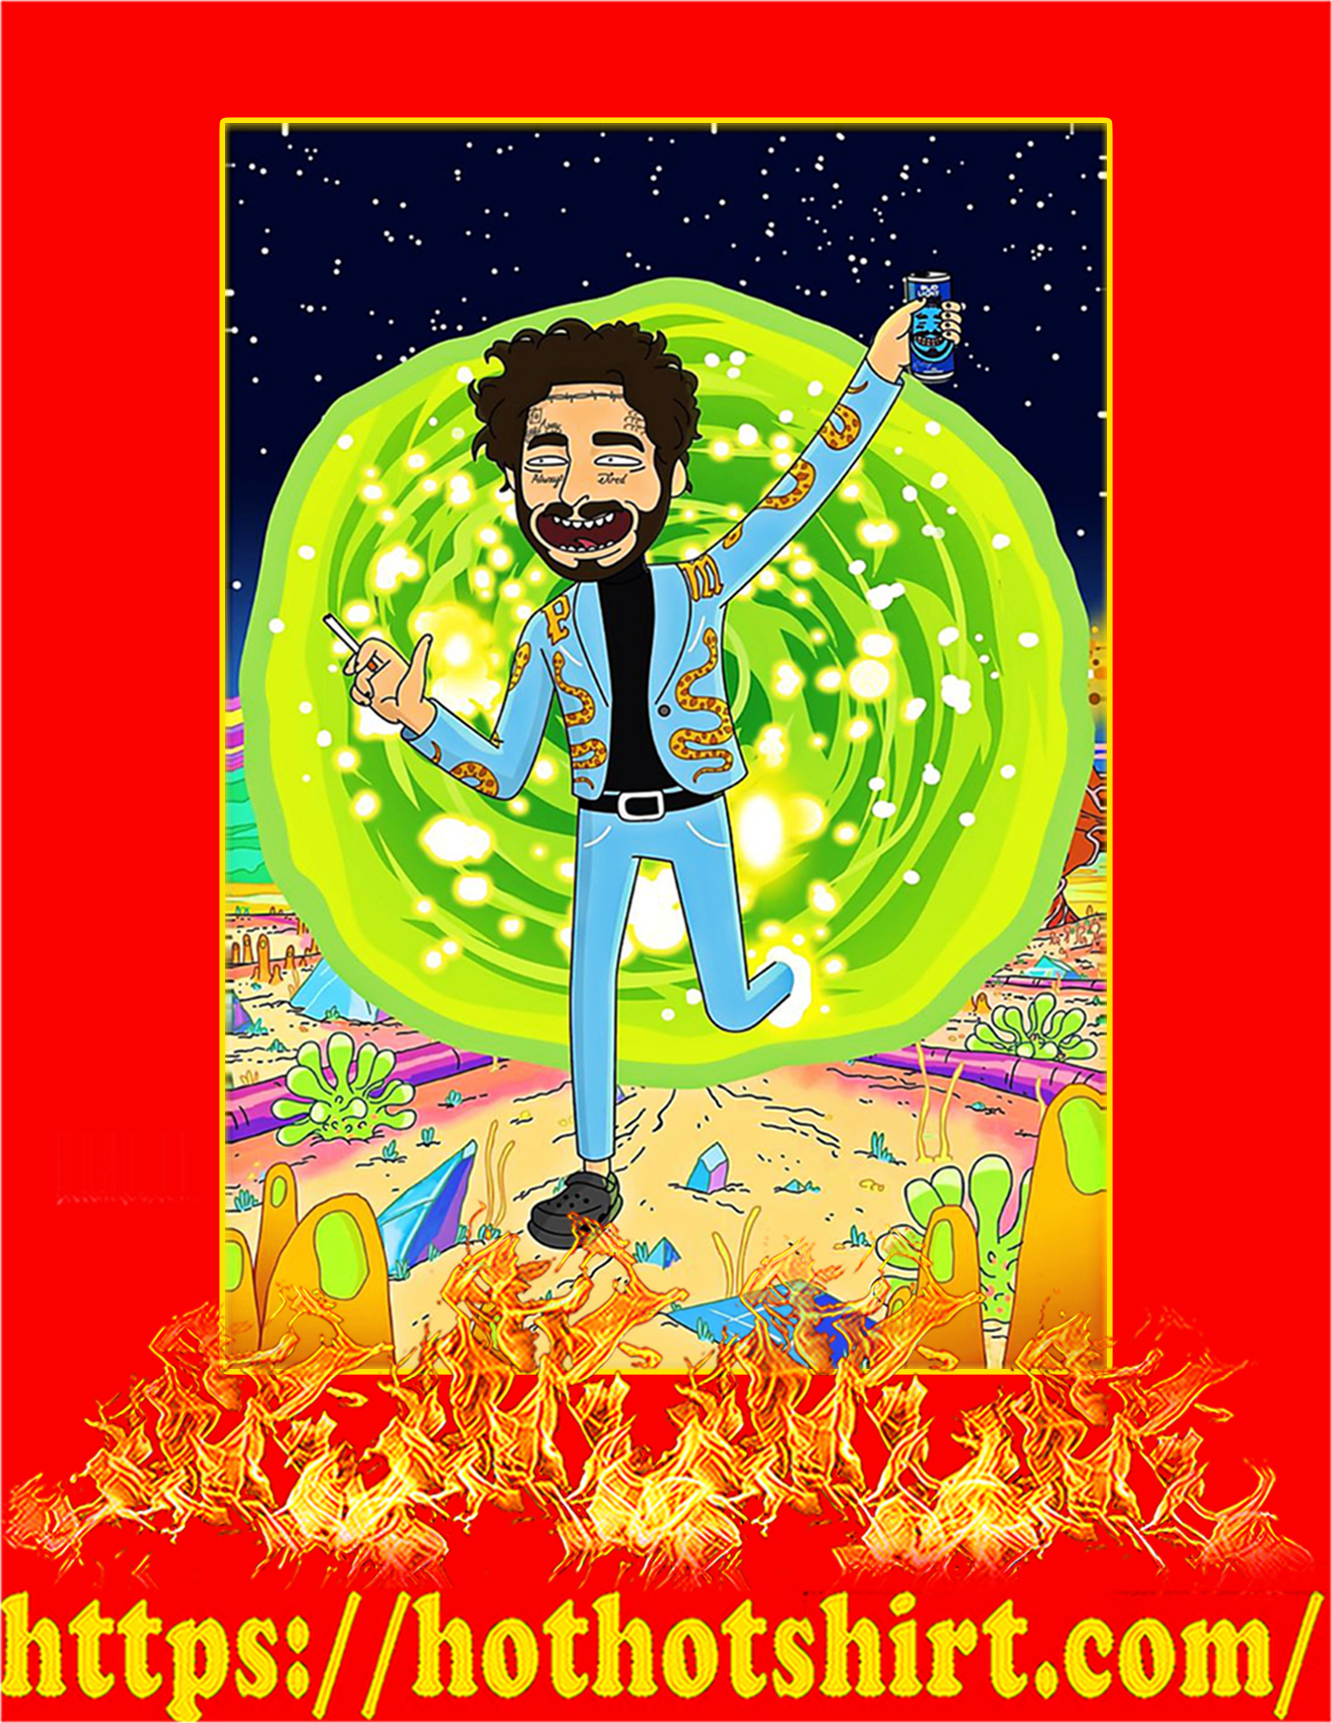 Post malone rick and morty poster